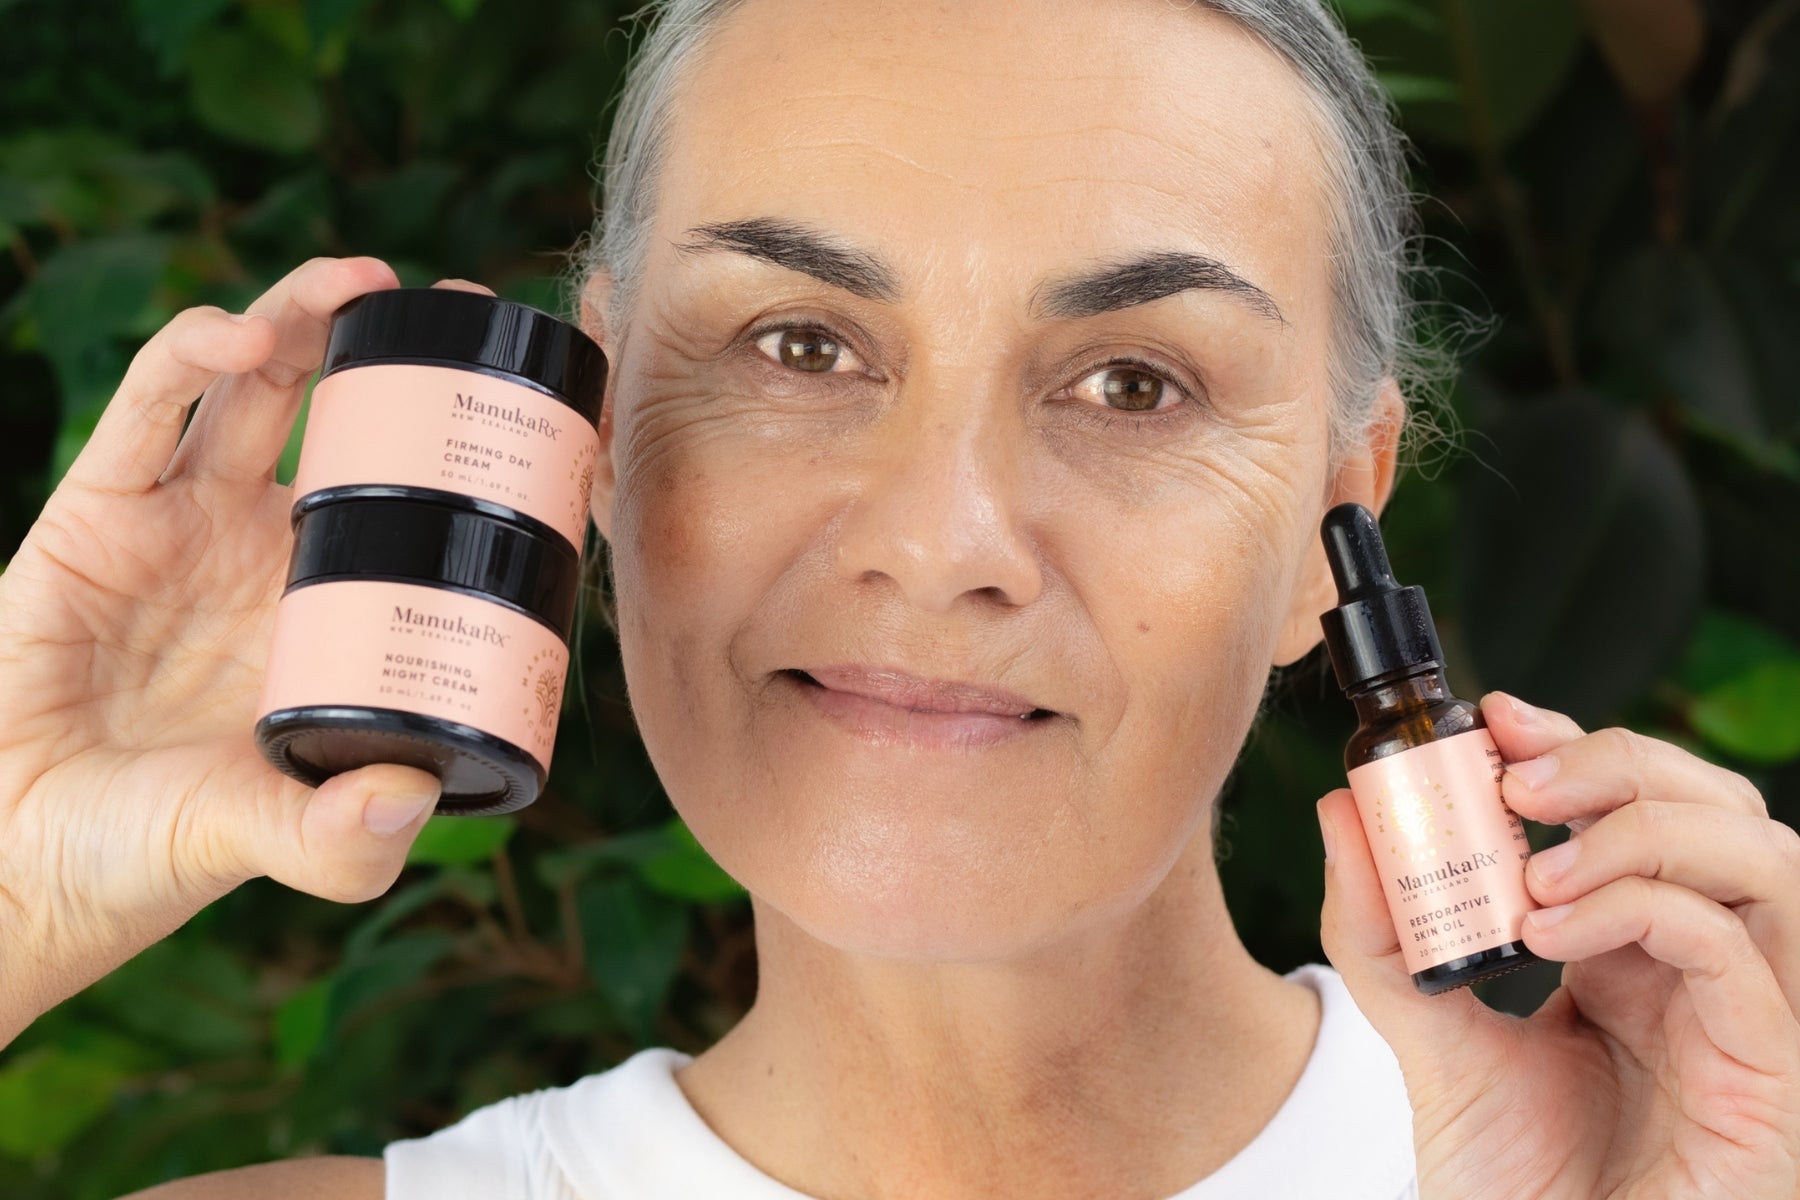 3 Incredible Skincare Products For Mature Skin blog image featuring a mature woman holding ManukaRx Day Cream and Night Cream for anti-aging benefits.